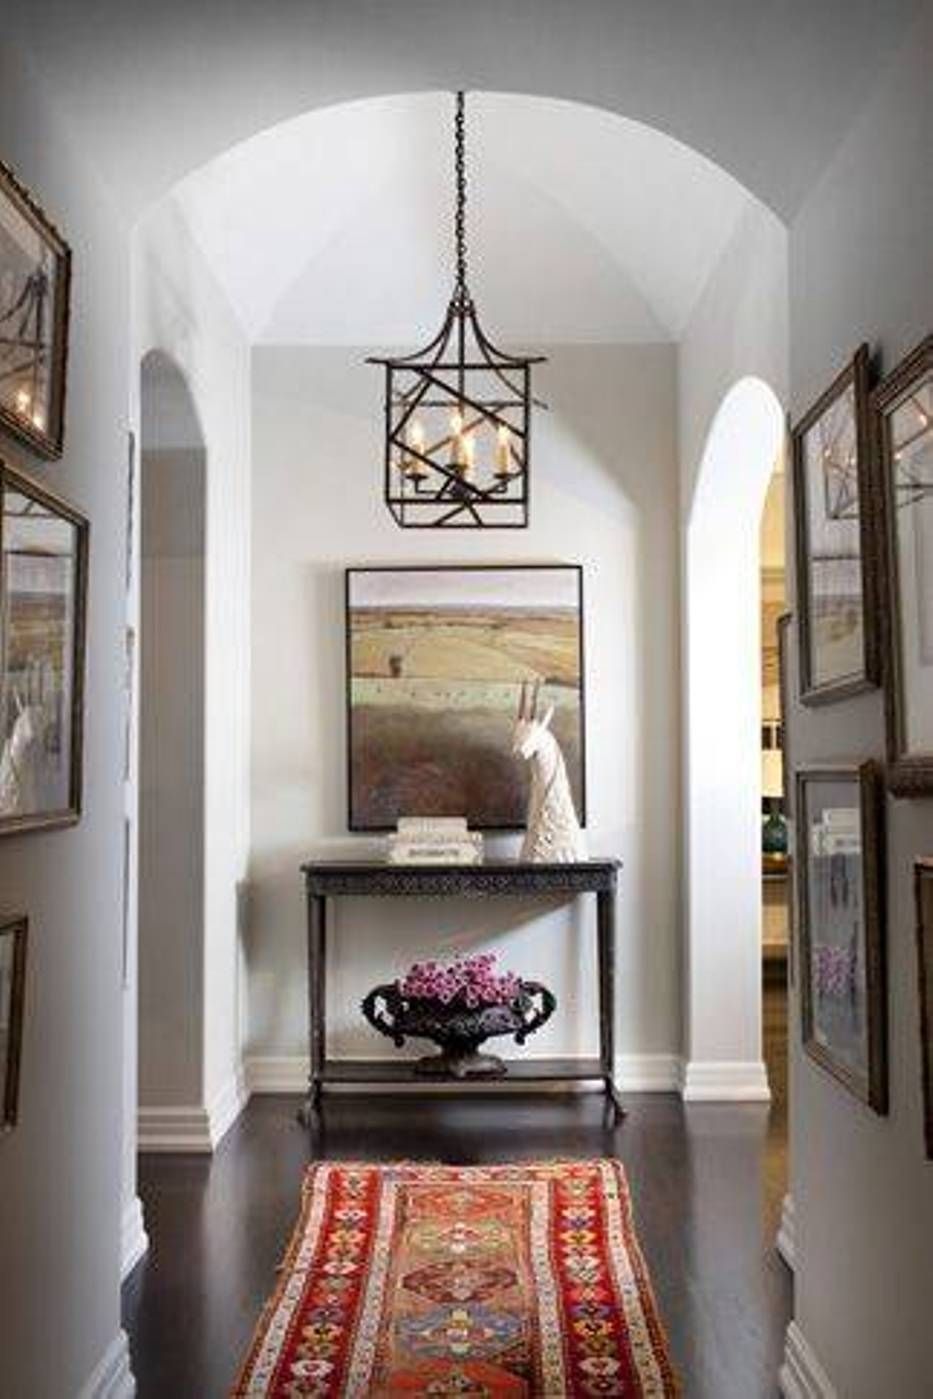 Amazing Foyer Pendant Lighting In Interior Decorating Ideas Glass Pertaining To Entryway Pendant Lights (View 2 of 15)